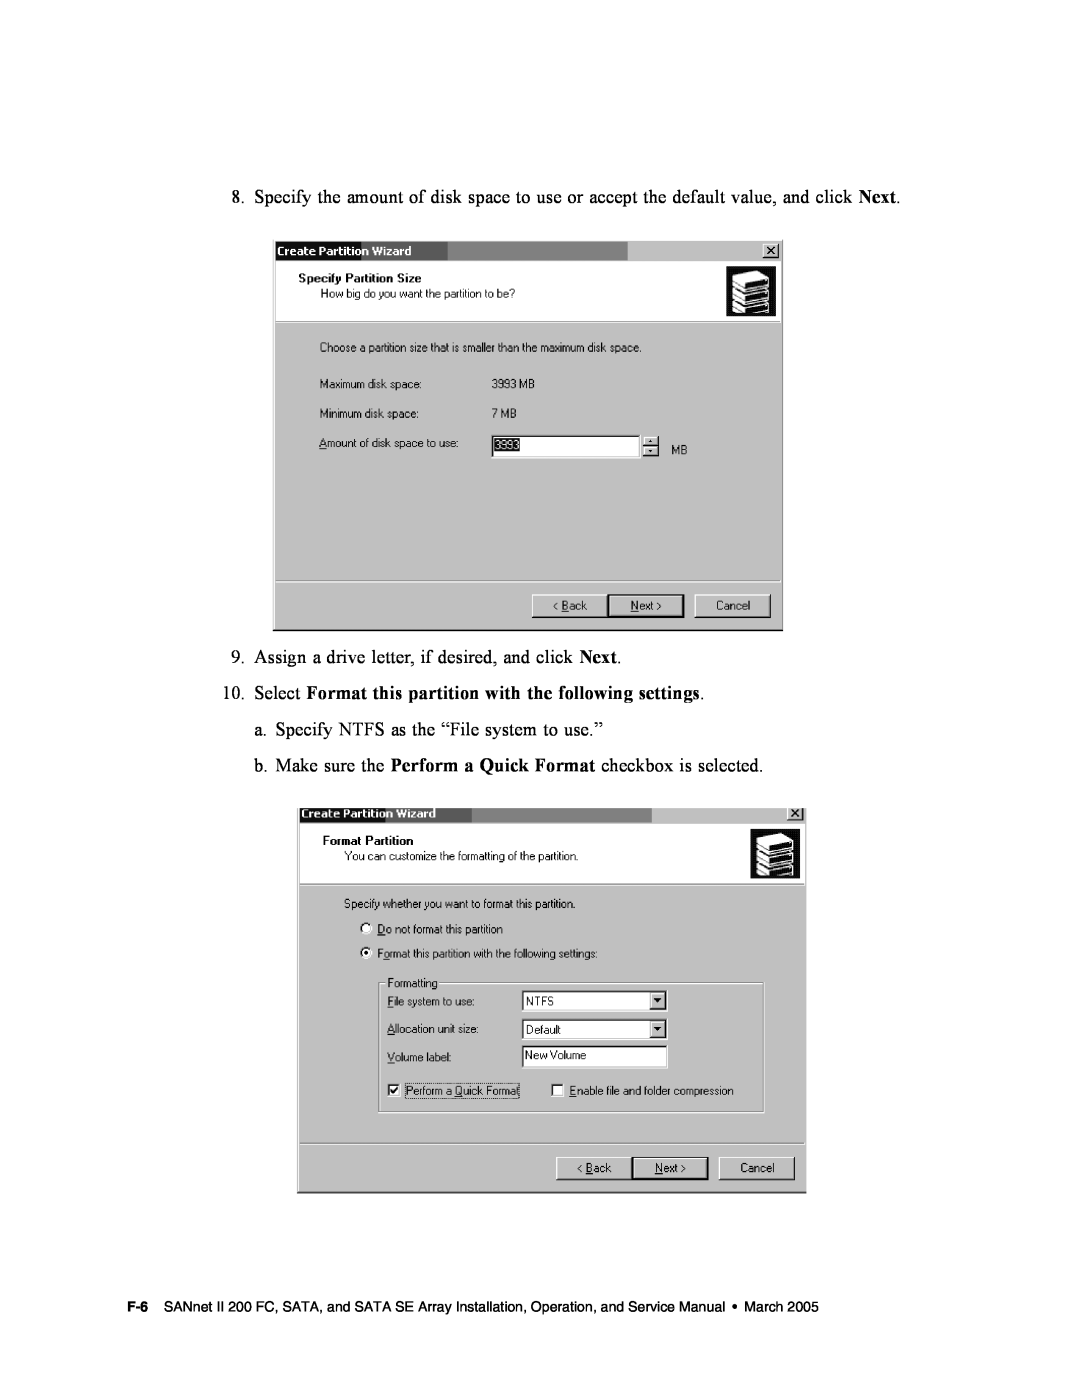 Dot Hill Systems II 200 FC service manual Select Format this partition with the following settings 